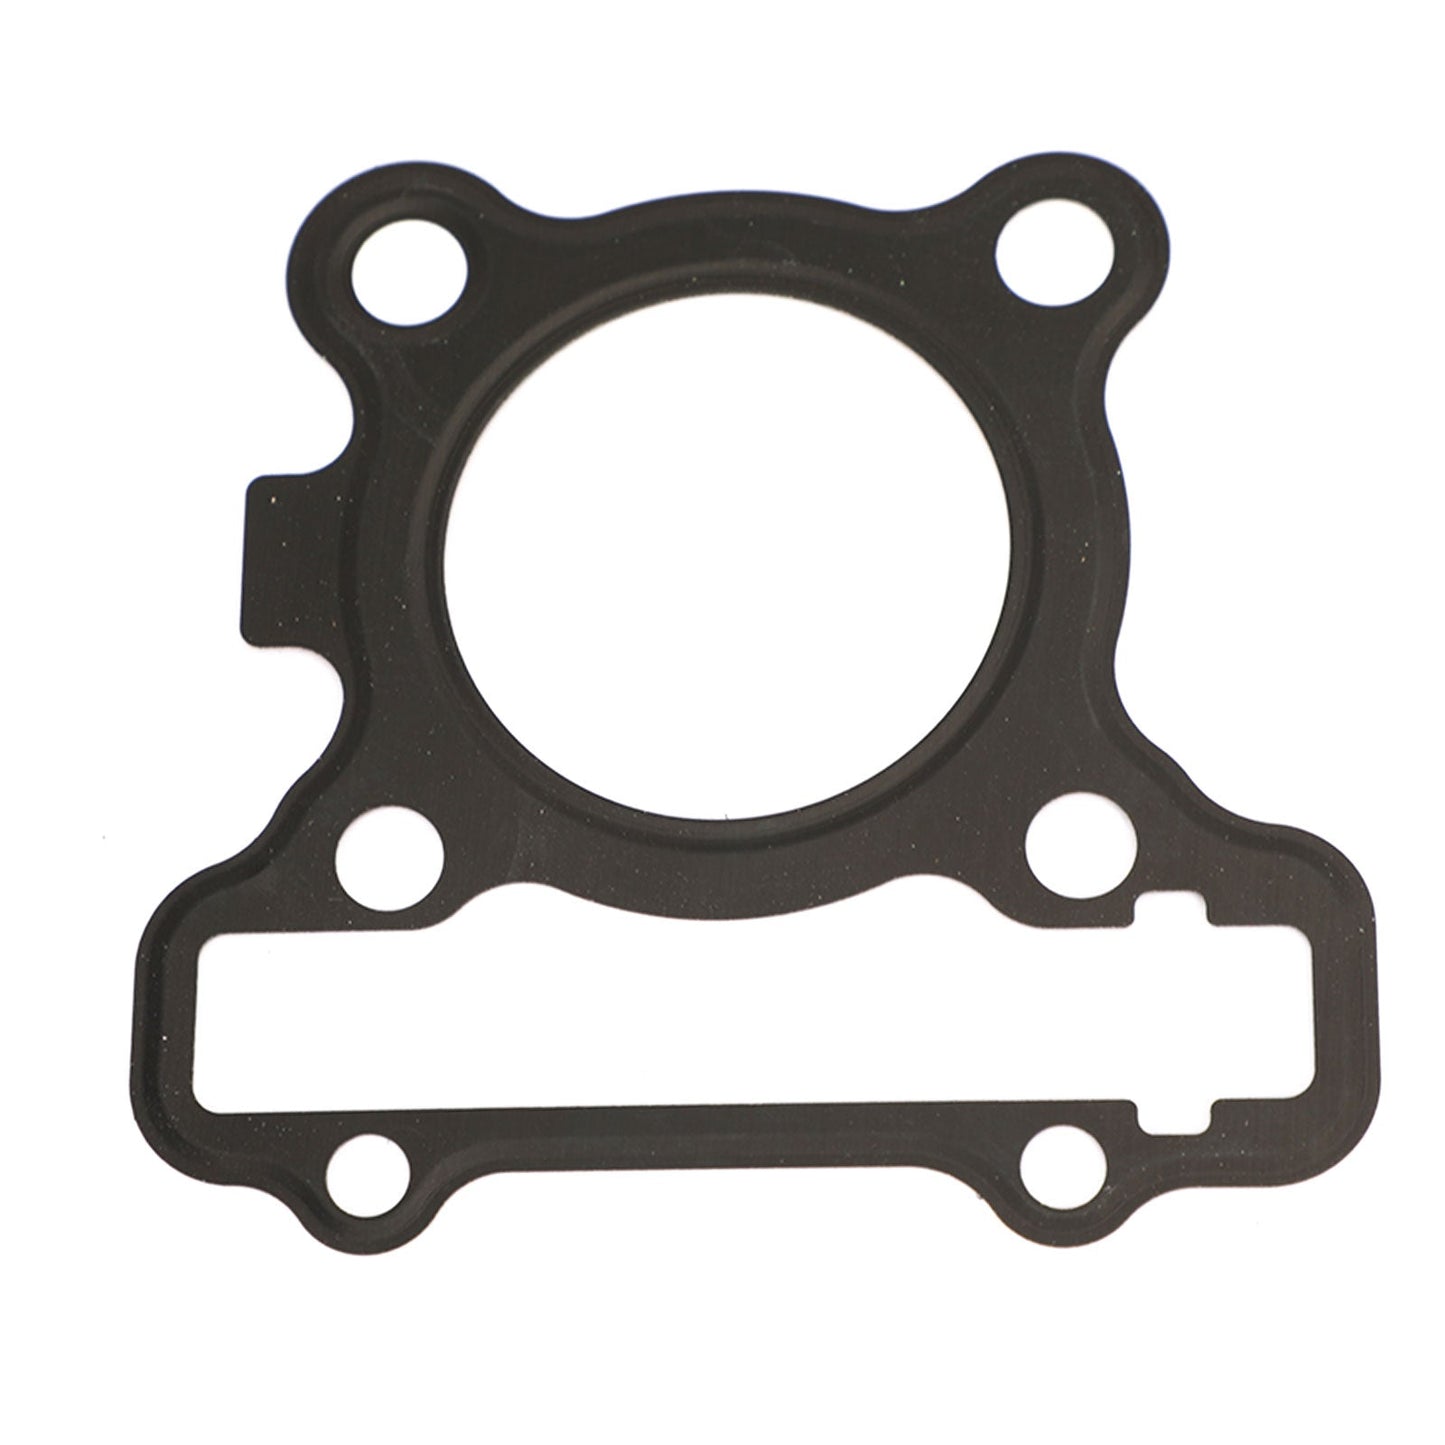 Cylinder Piston Gasket Kit 52.4mm Fit for Yamaah MIO M3 / MIO i 125 / LTS125